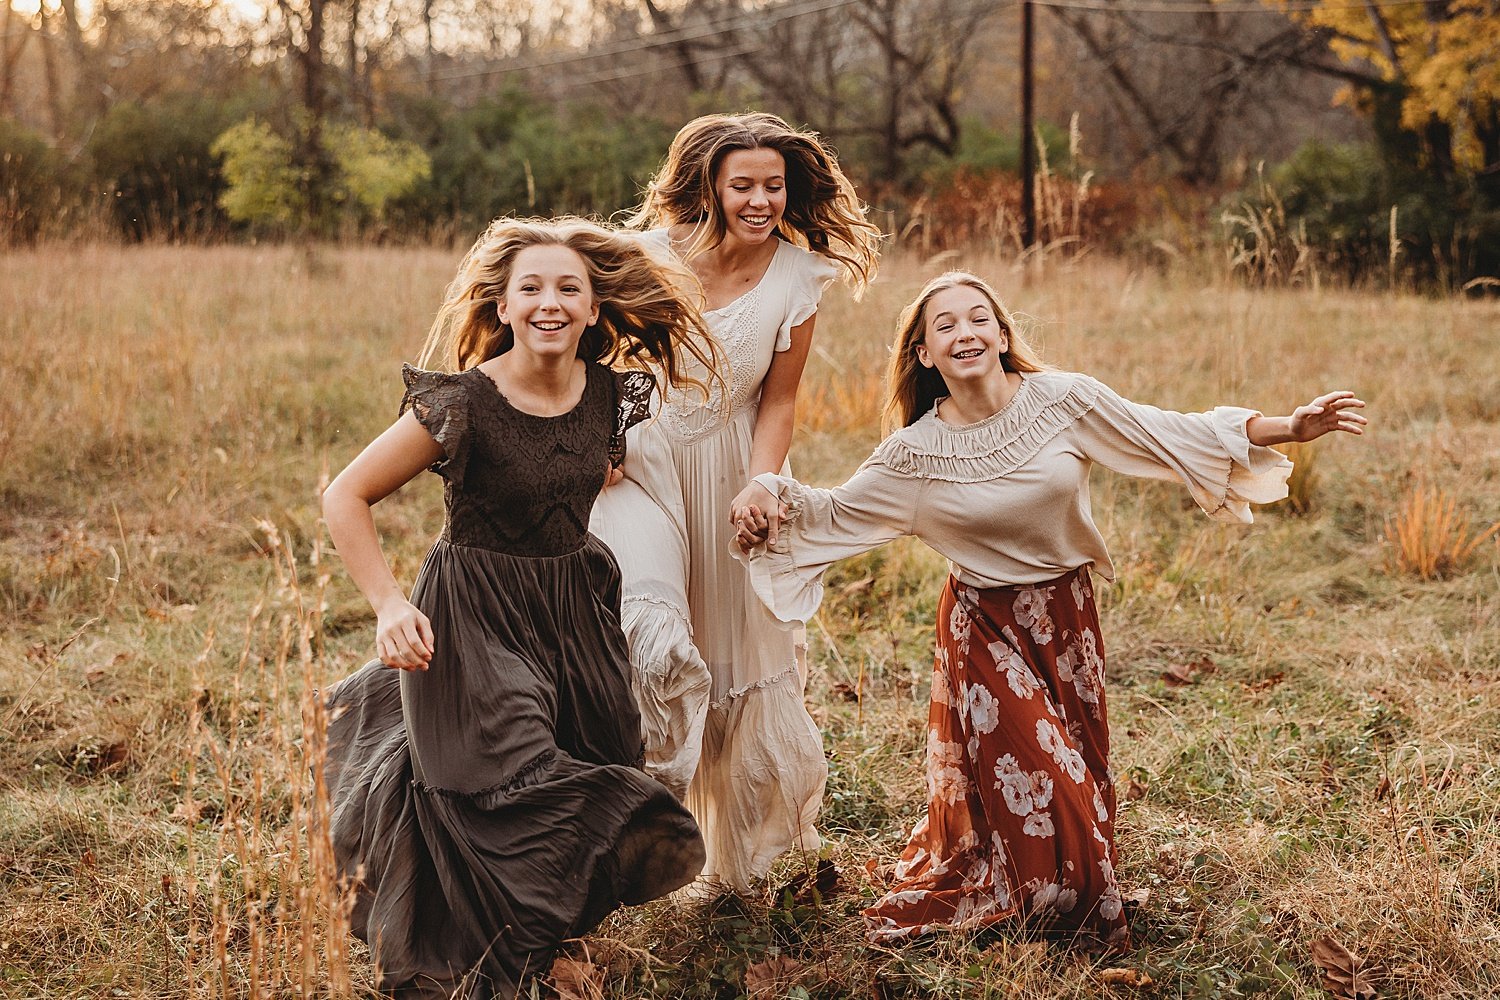 Wyomissing Berks County Pennsylvania outdoor fall family portrait photographer photoshoot twins sisters